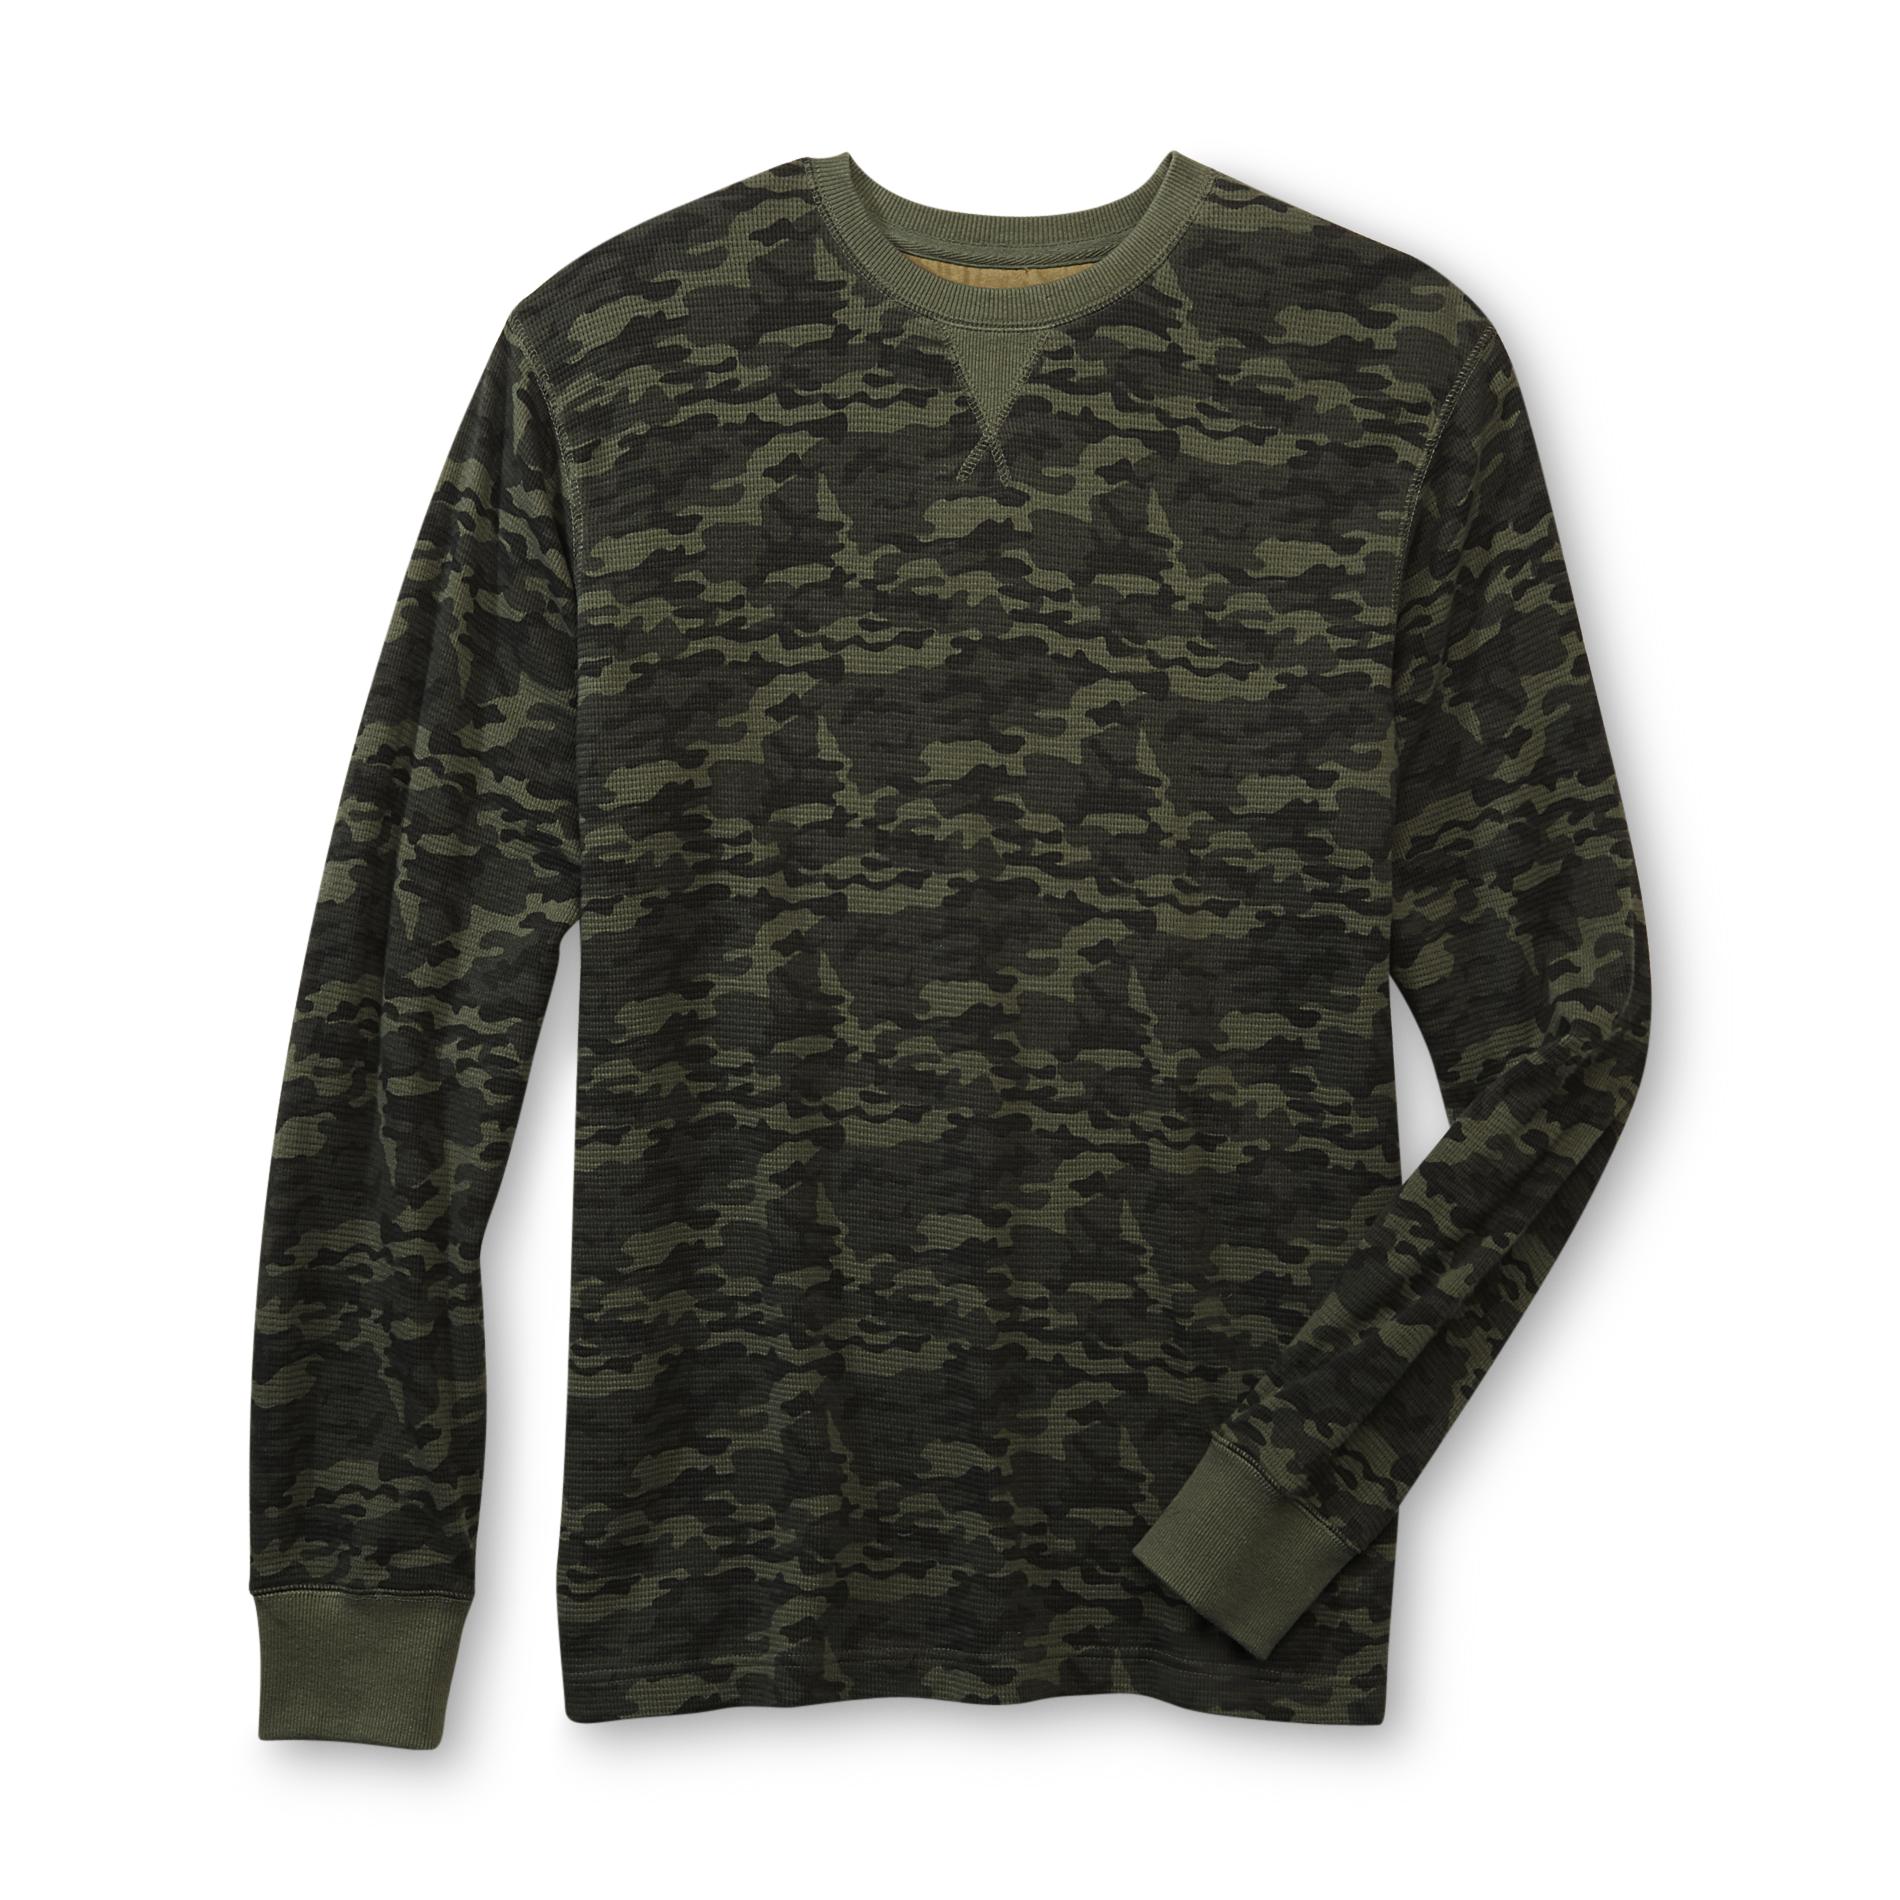 Northwest Territory Men's Thermal T-shirt- Camouflage Print